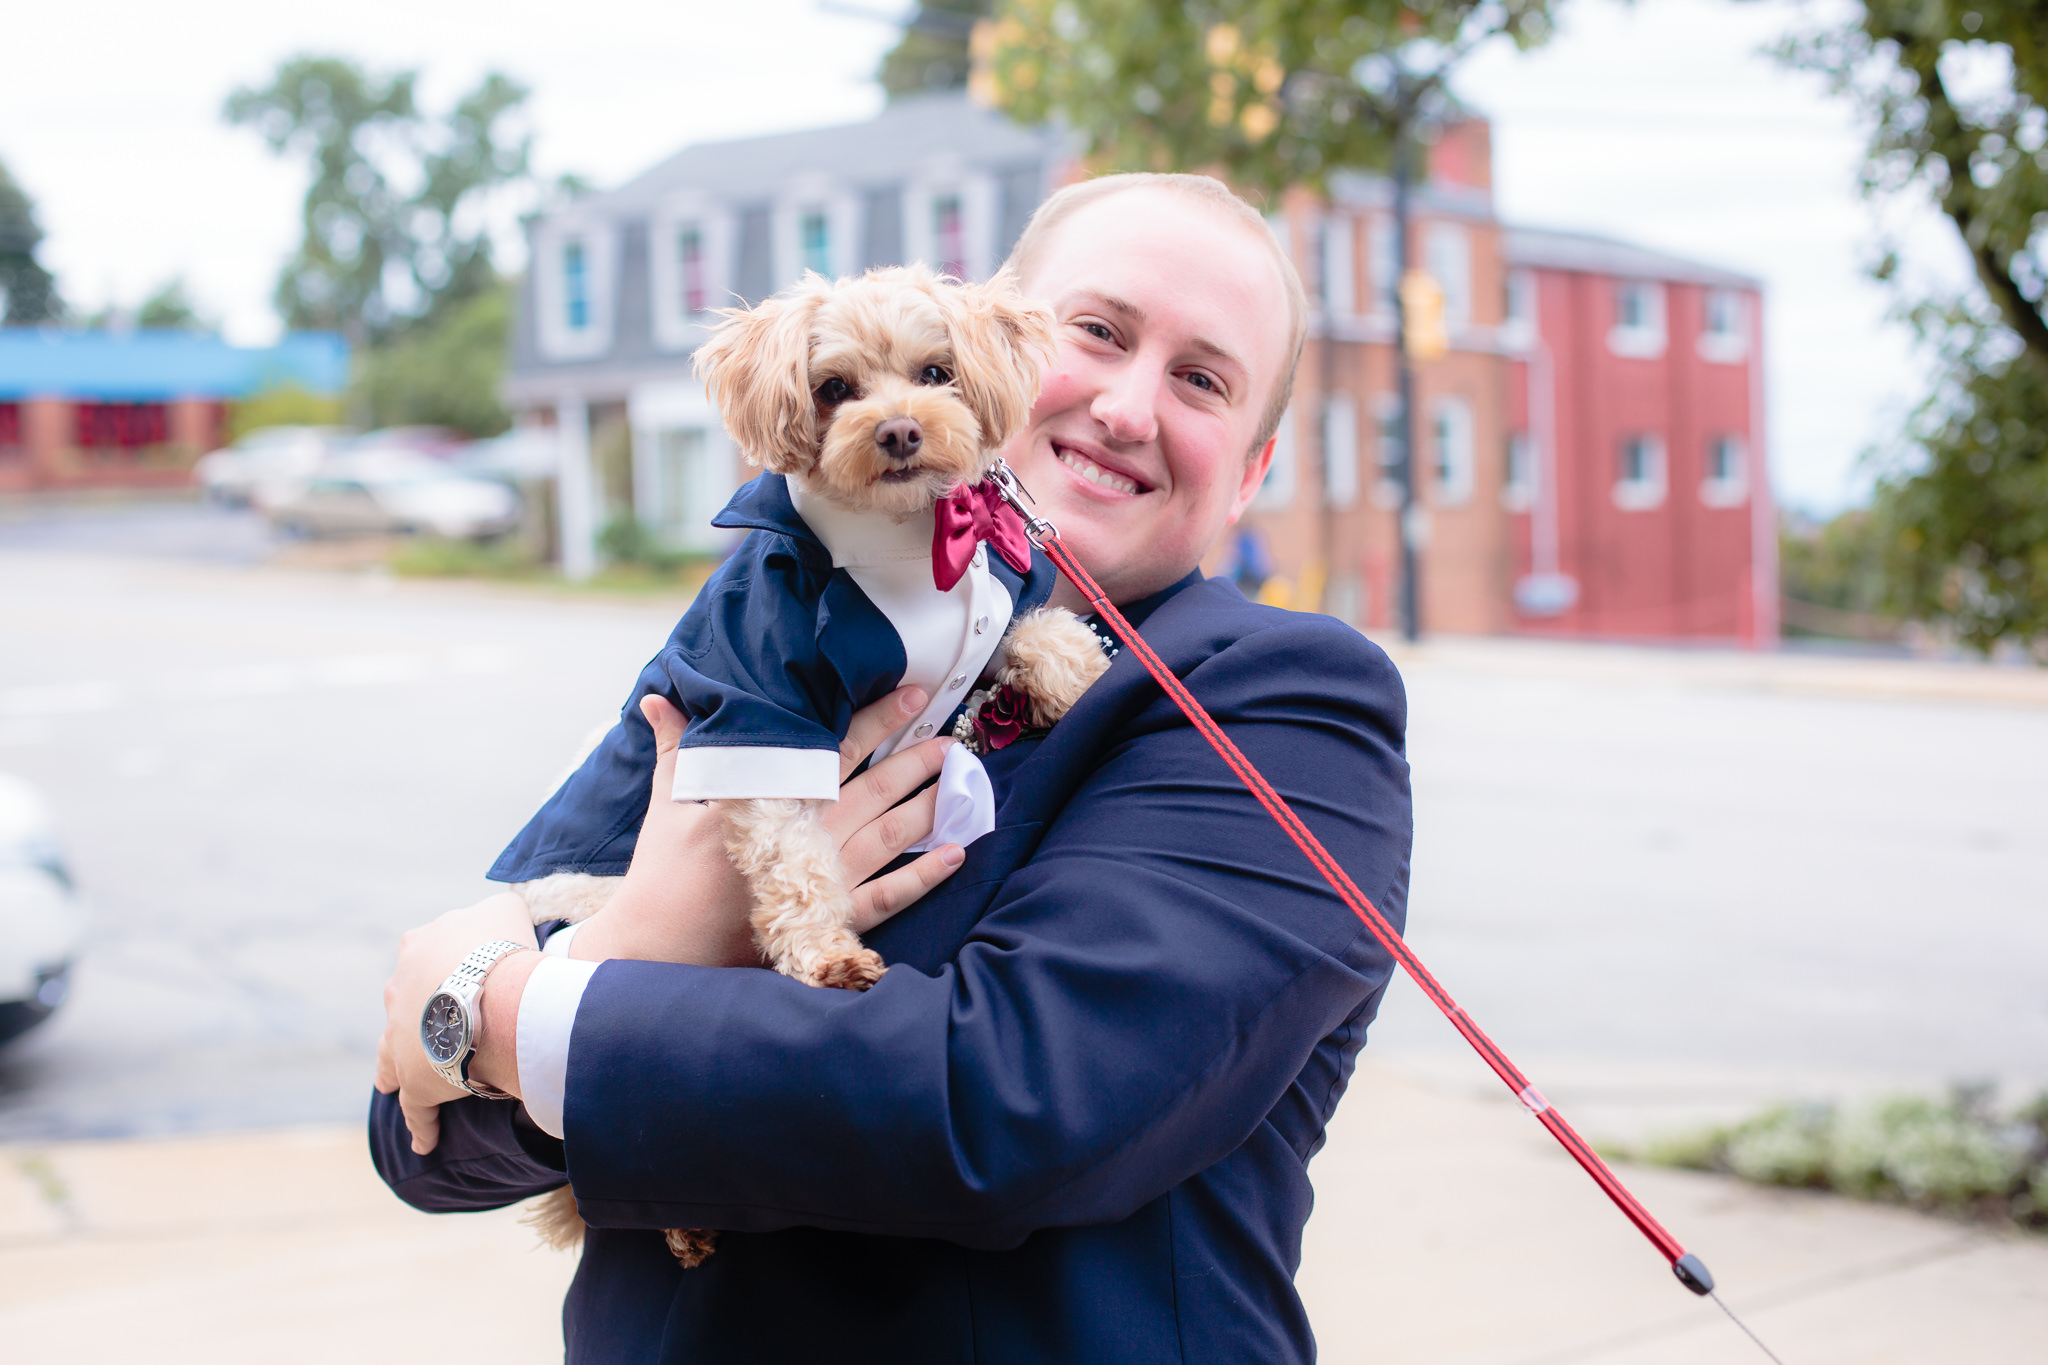 The groom and his dog in matching suits outside a wedding at the Pennsylvanian